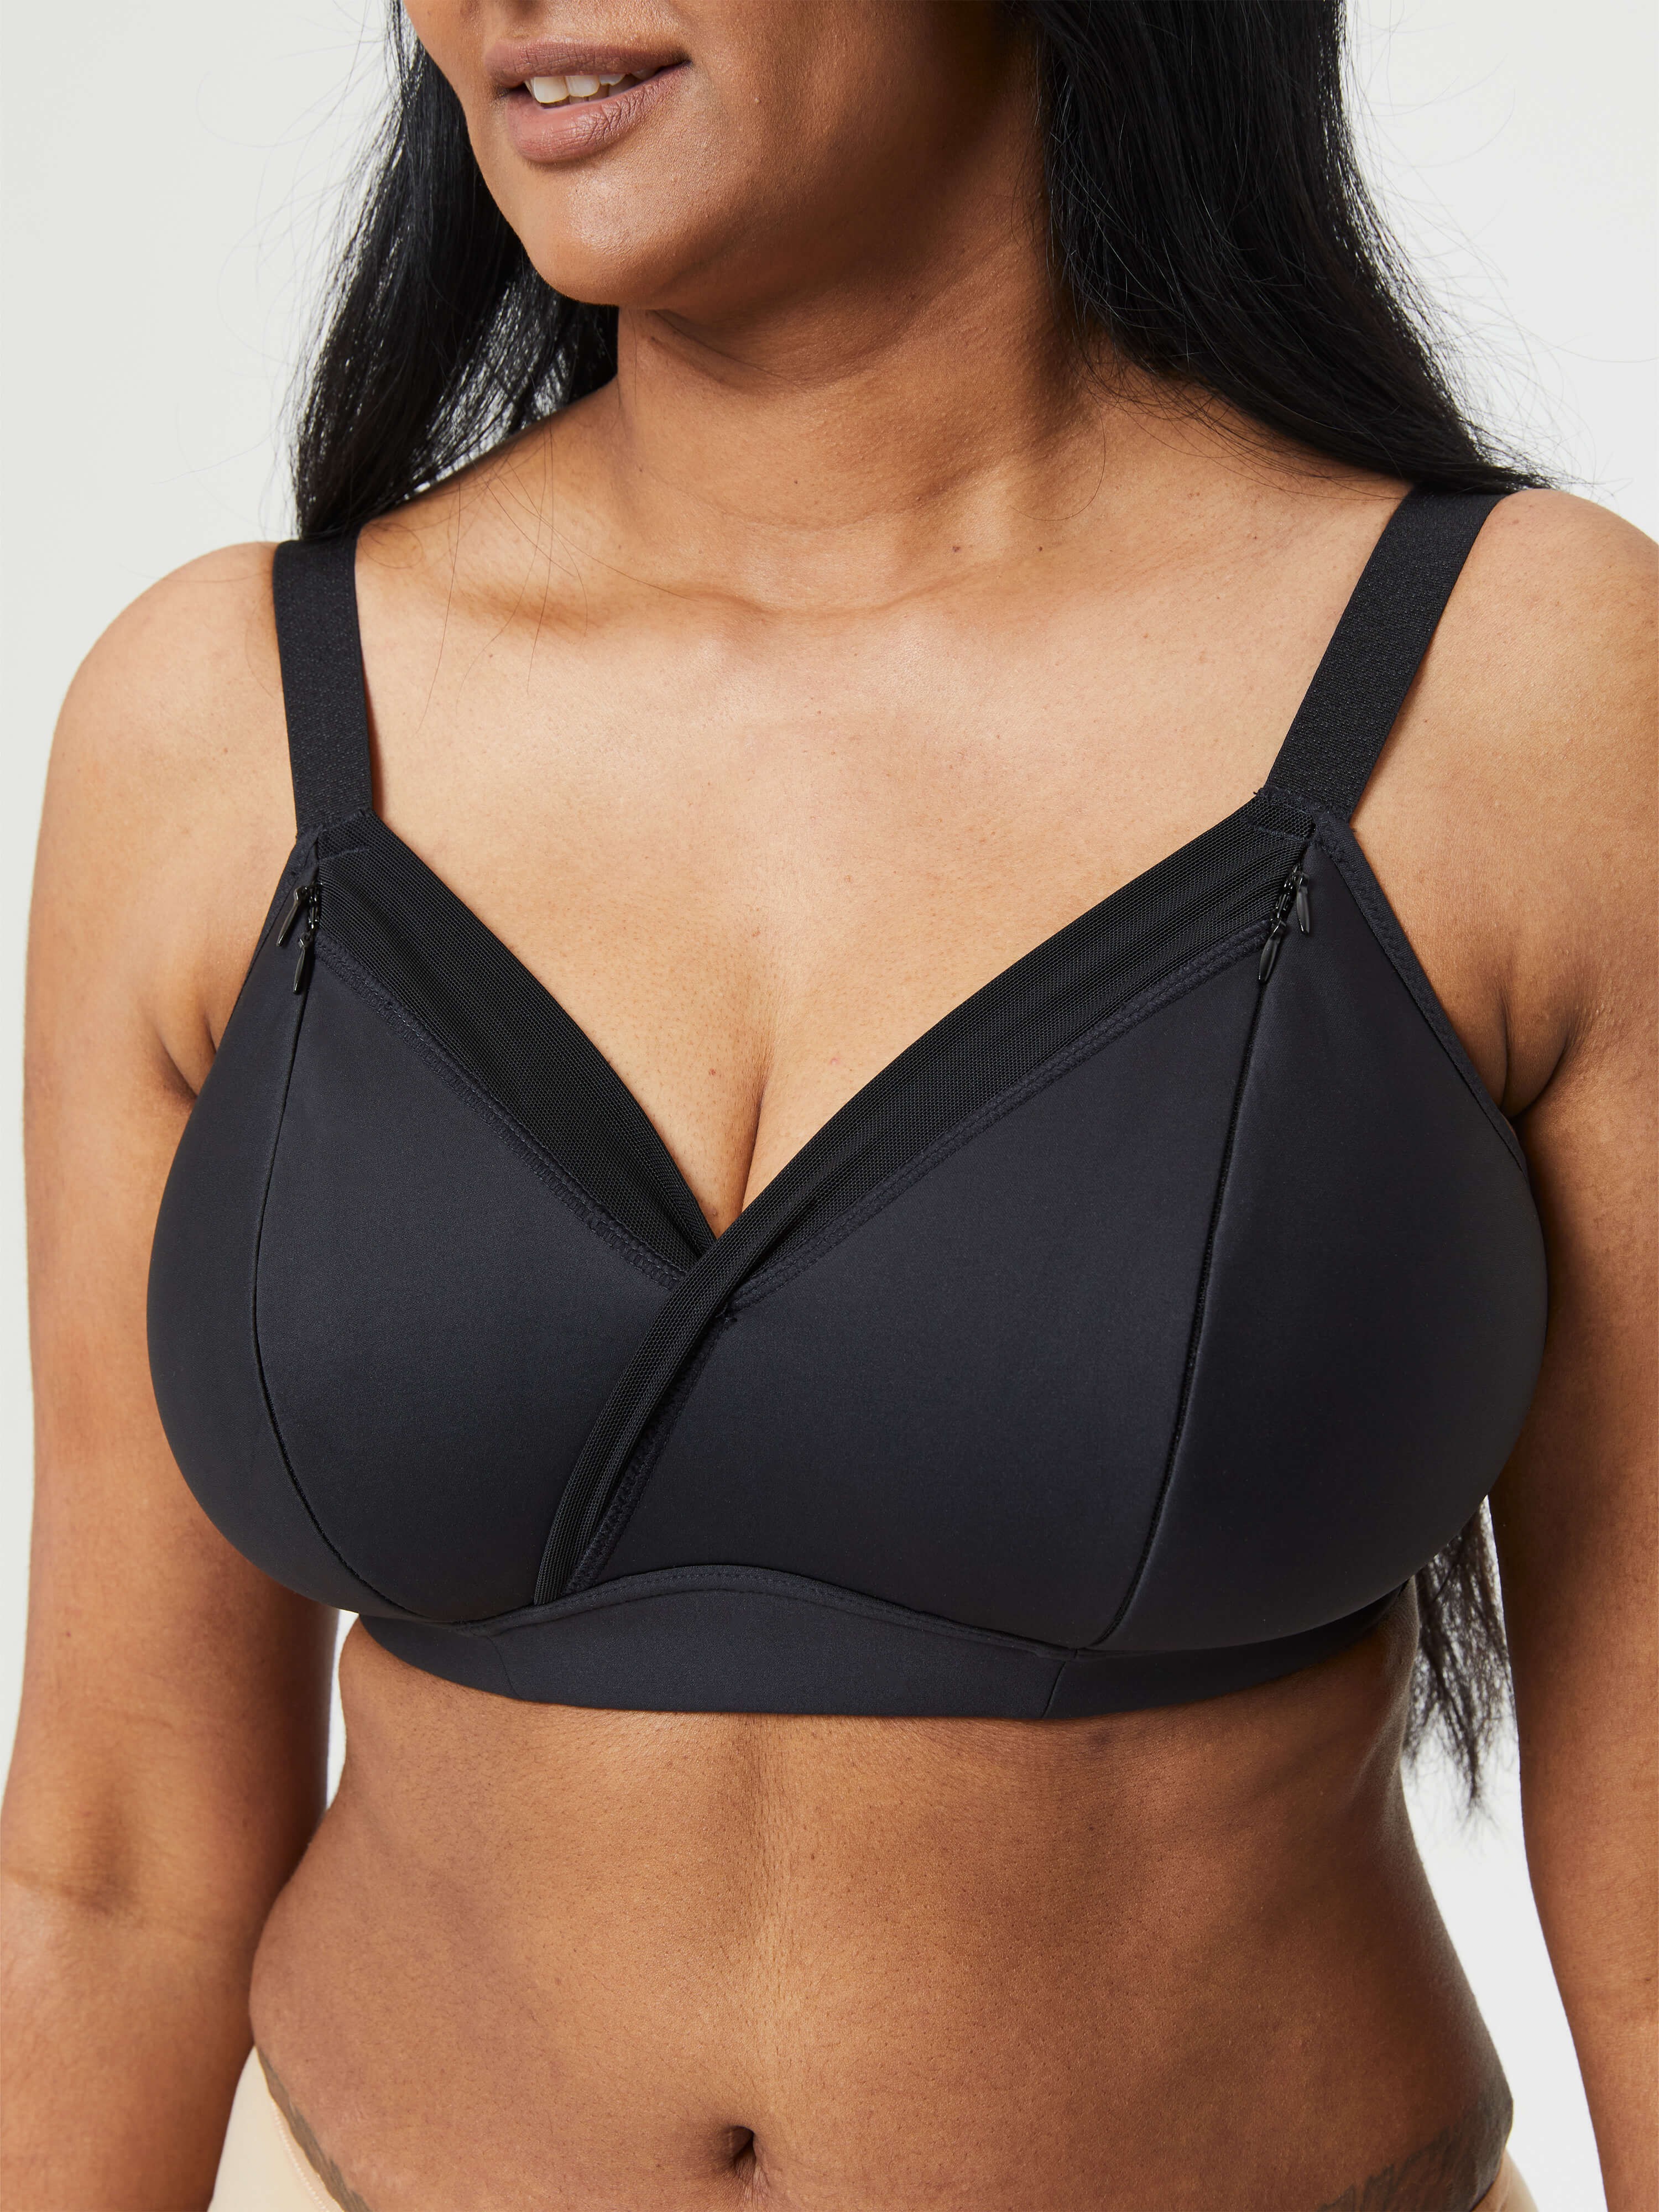 the fantastic hands free pumping attachment in black – Our Bralette Club